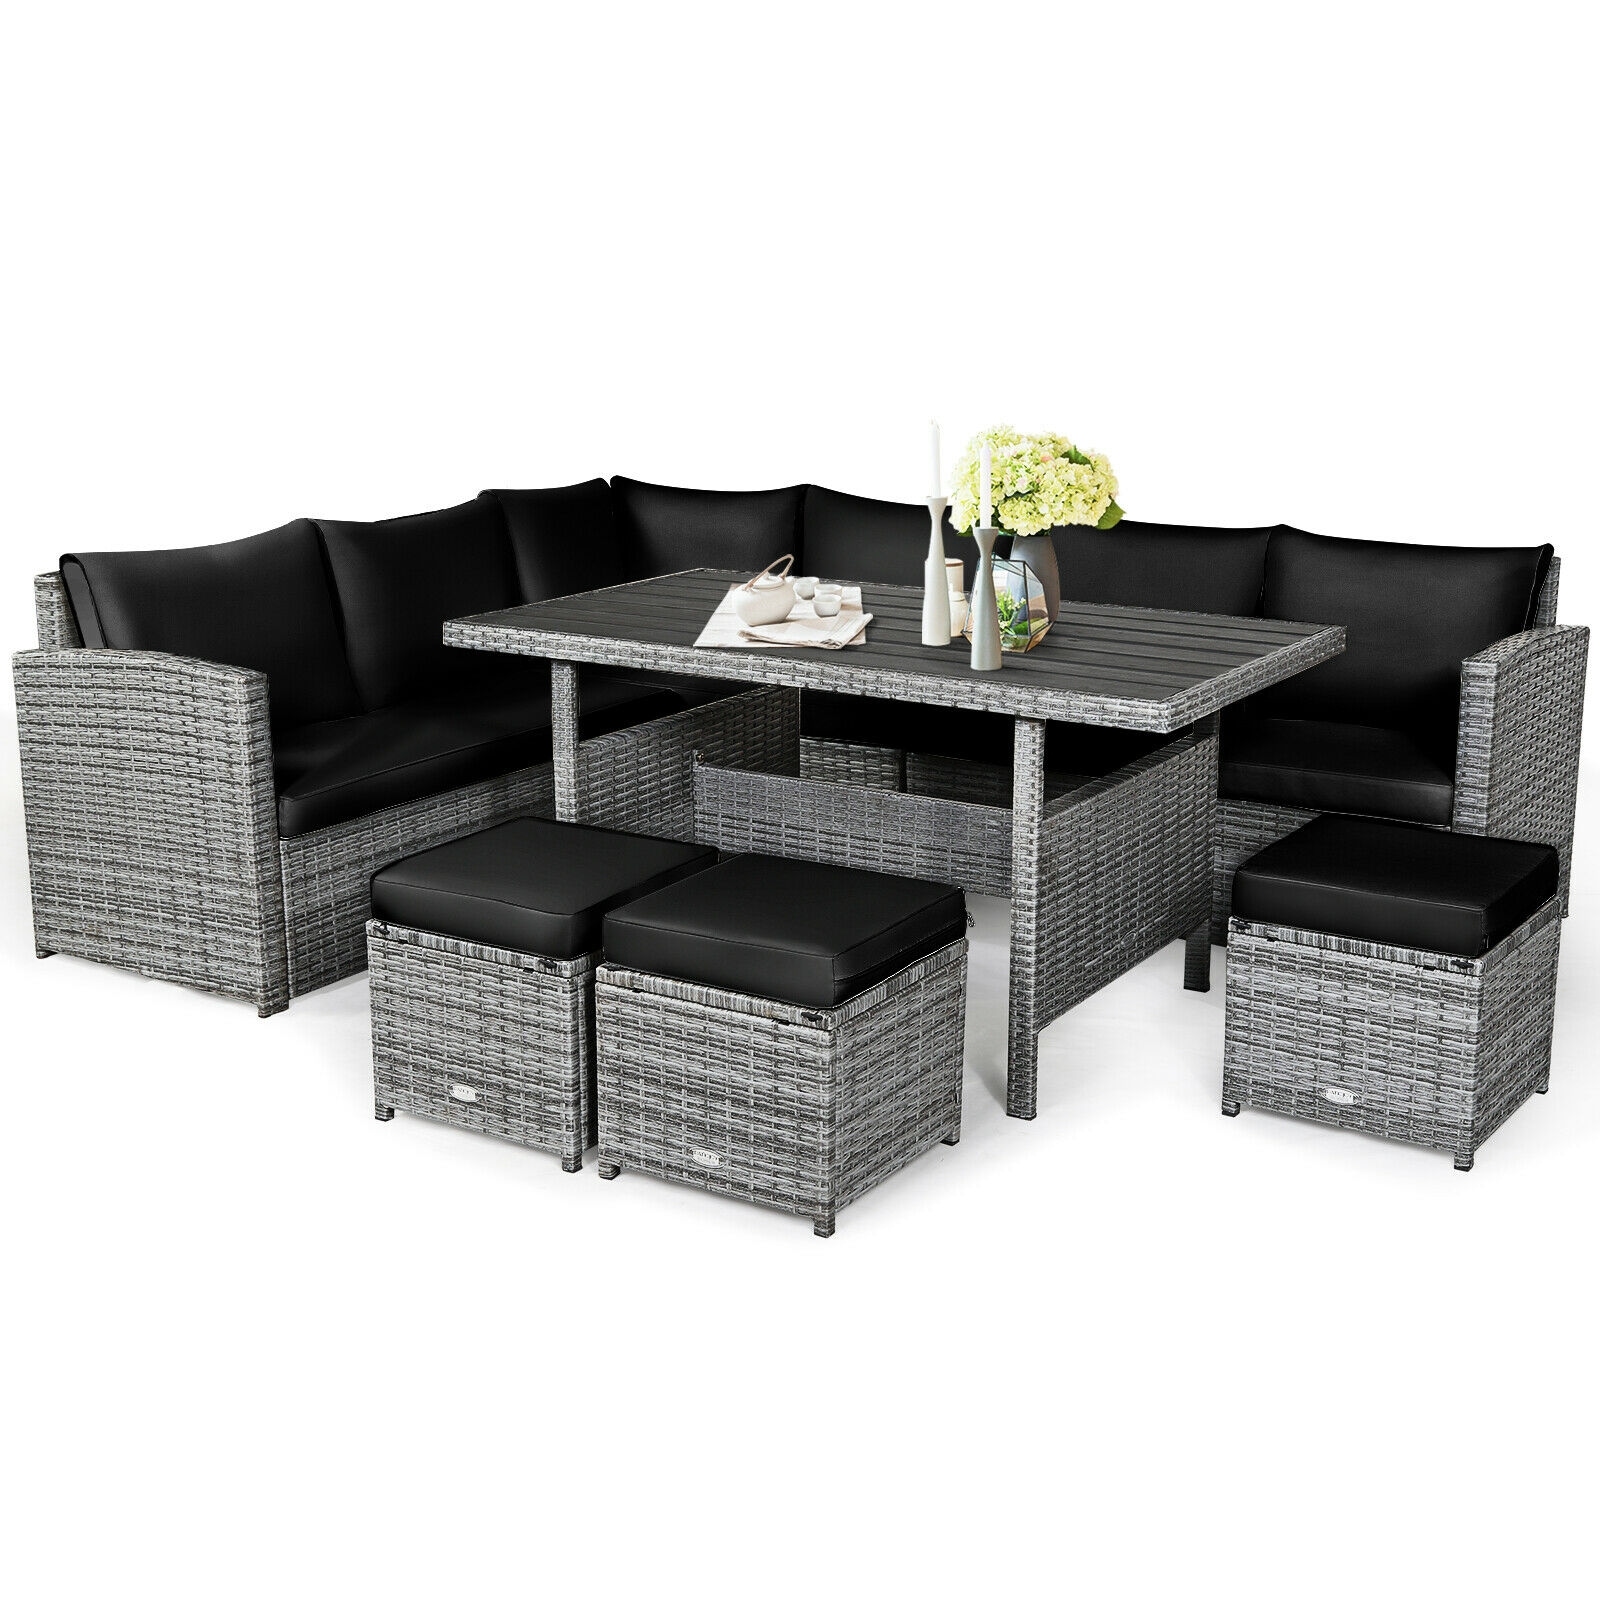 7 Pieces Patio Rattan Black Dining Furniture Sectional Sofa Set with Wicker Ottoman | - Forclover HYFAS18BK